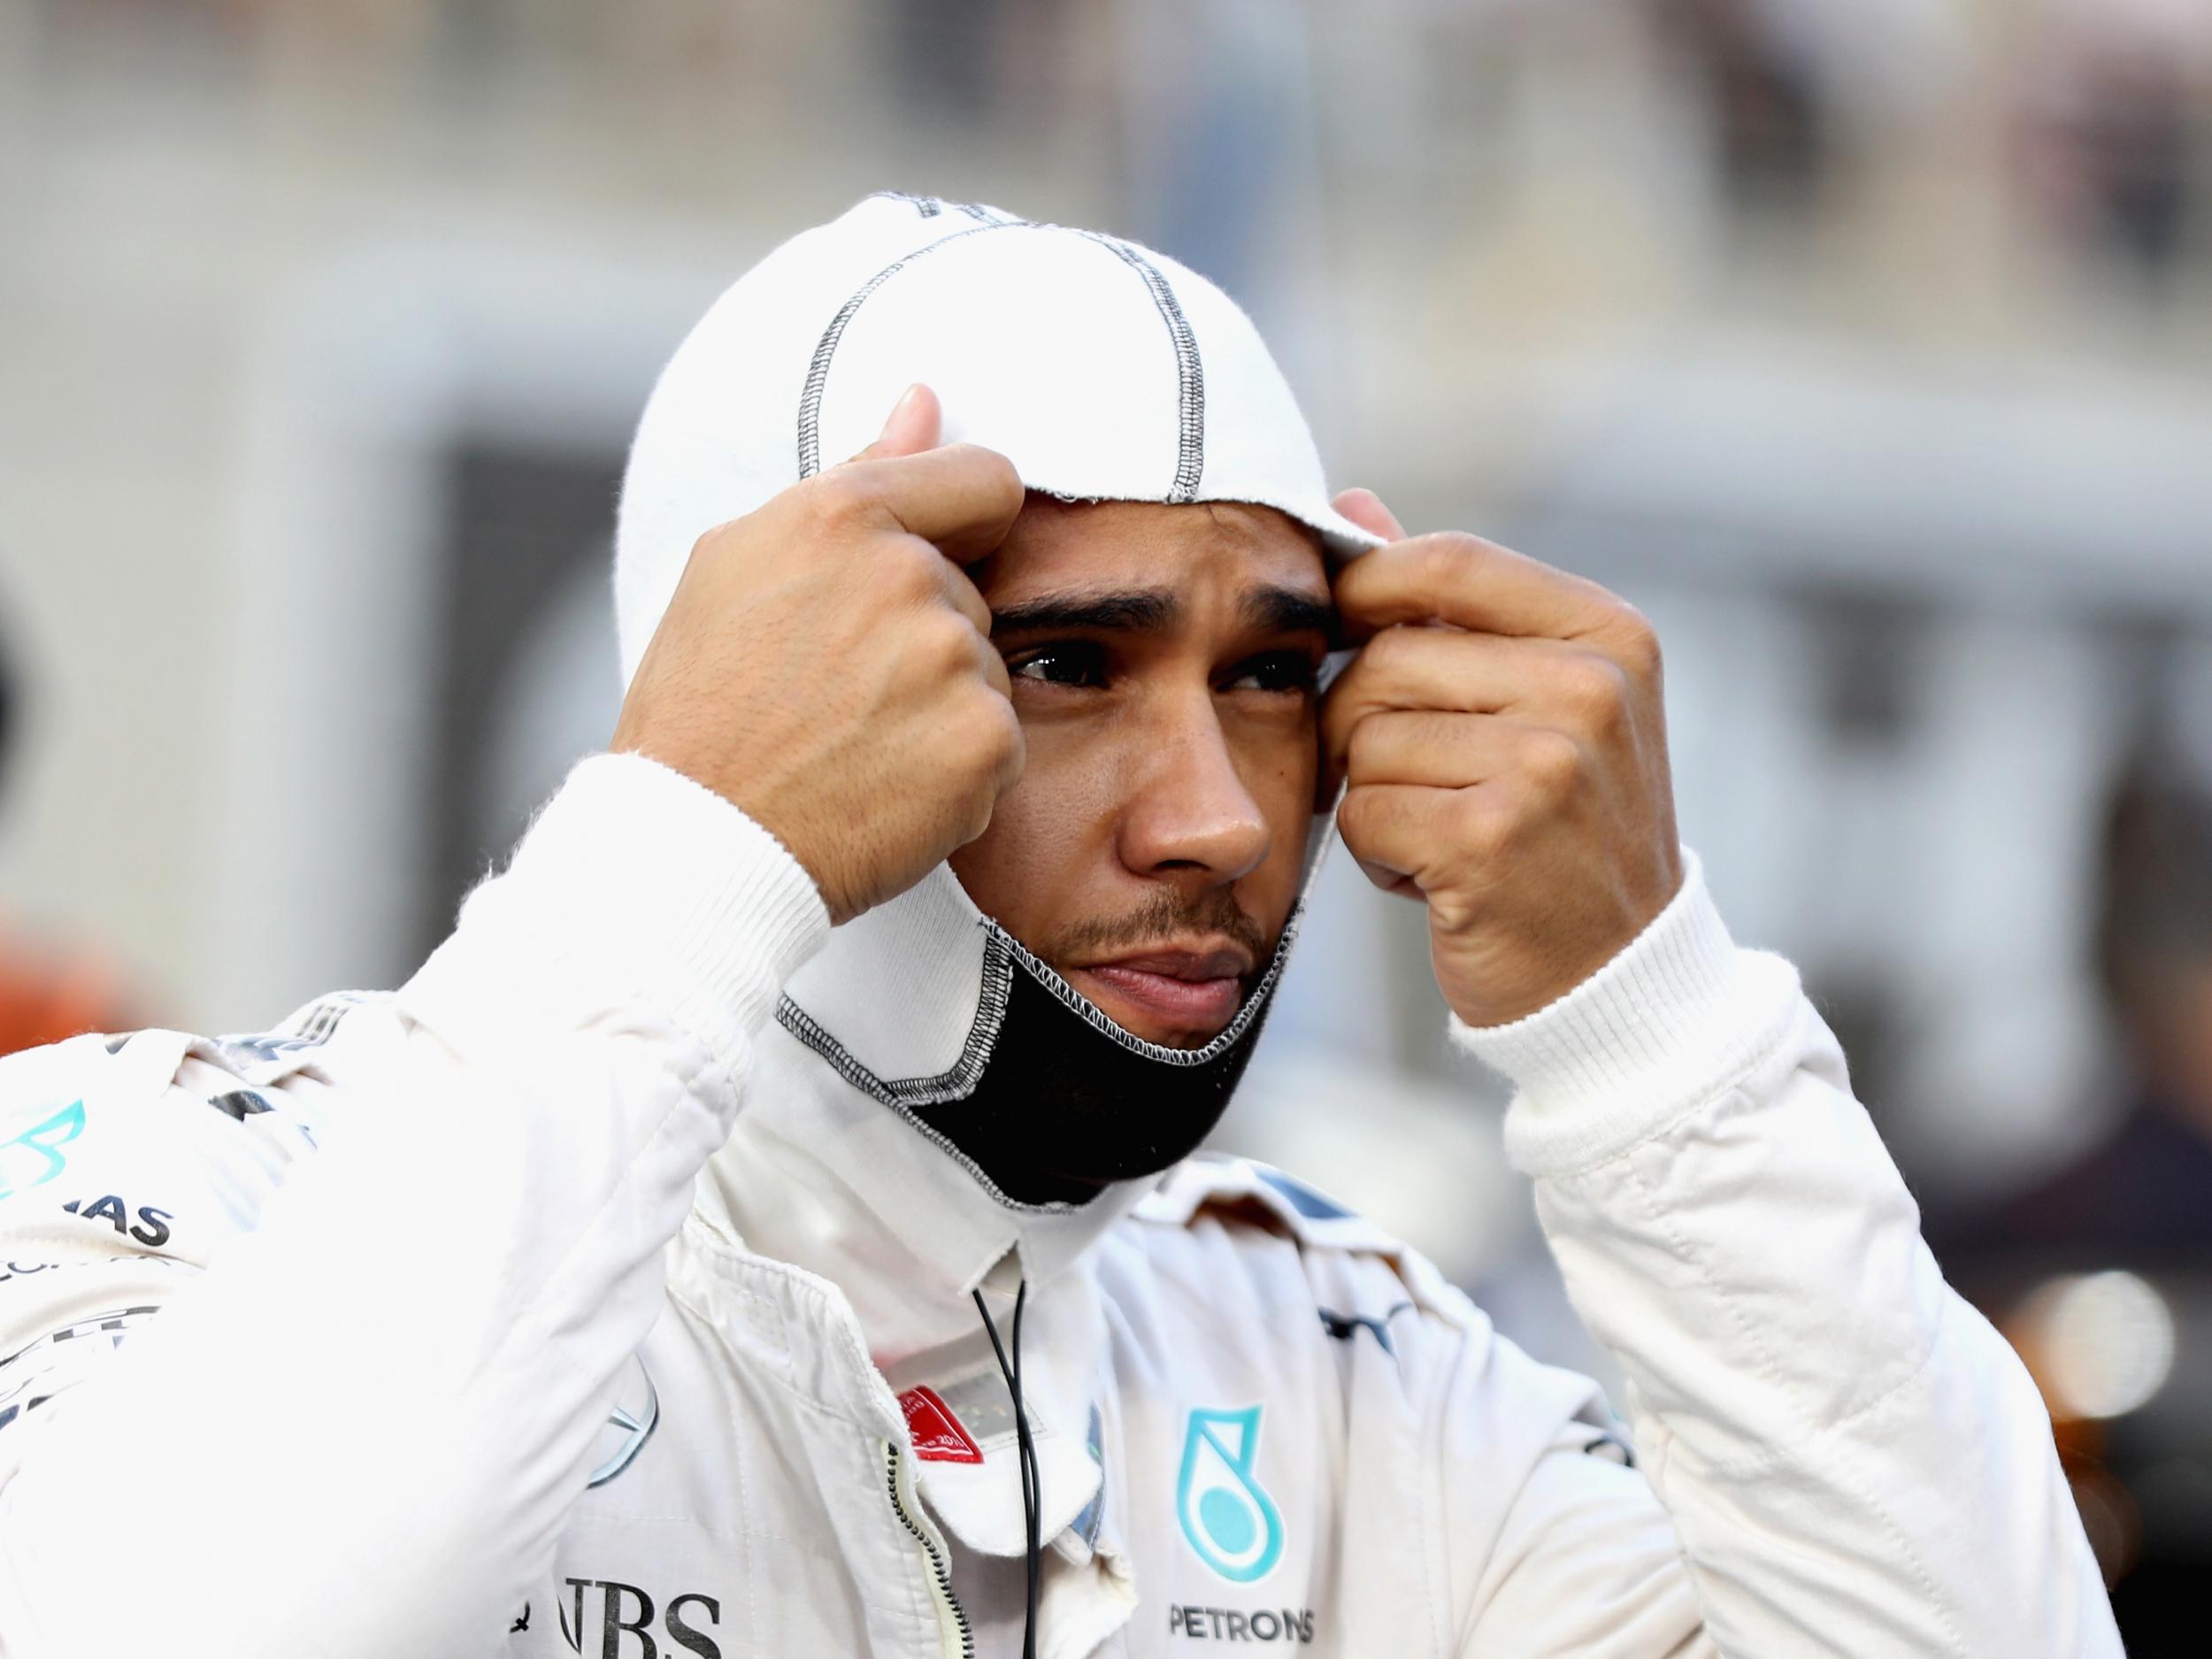 Hamilton has been linked with a move back to McLaren